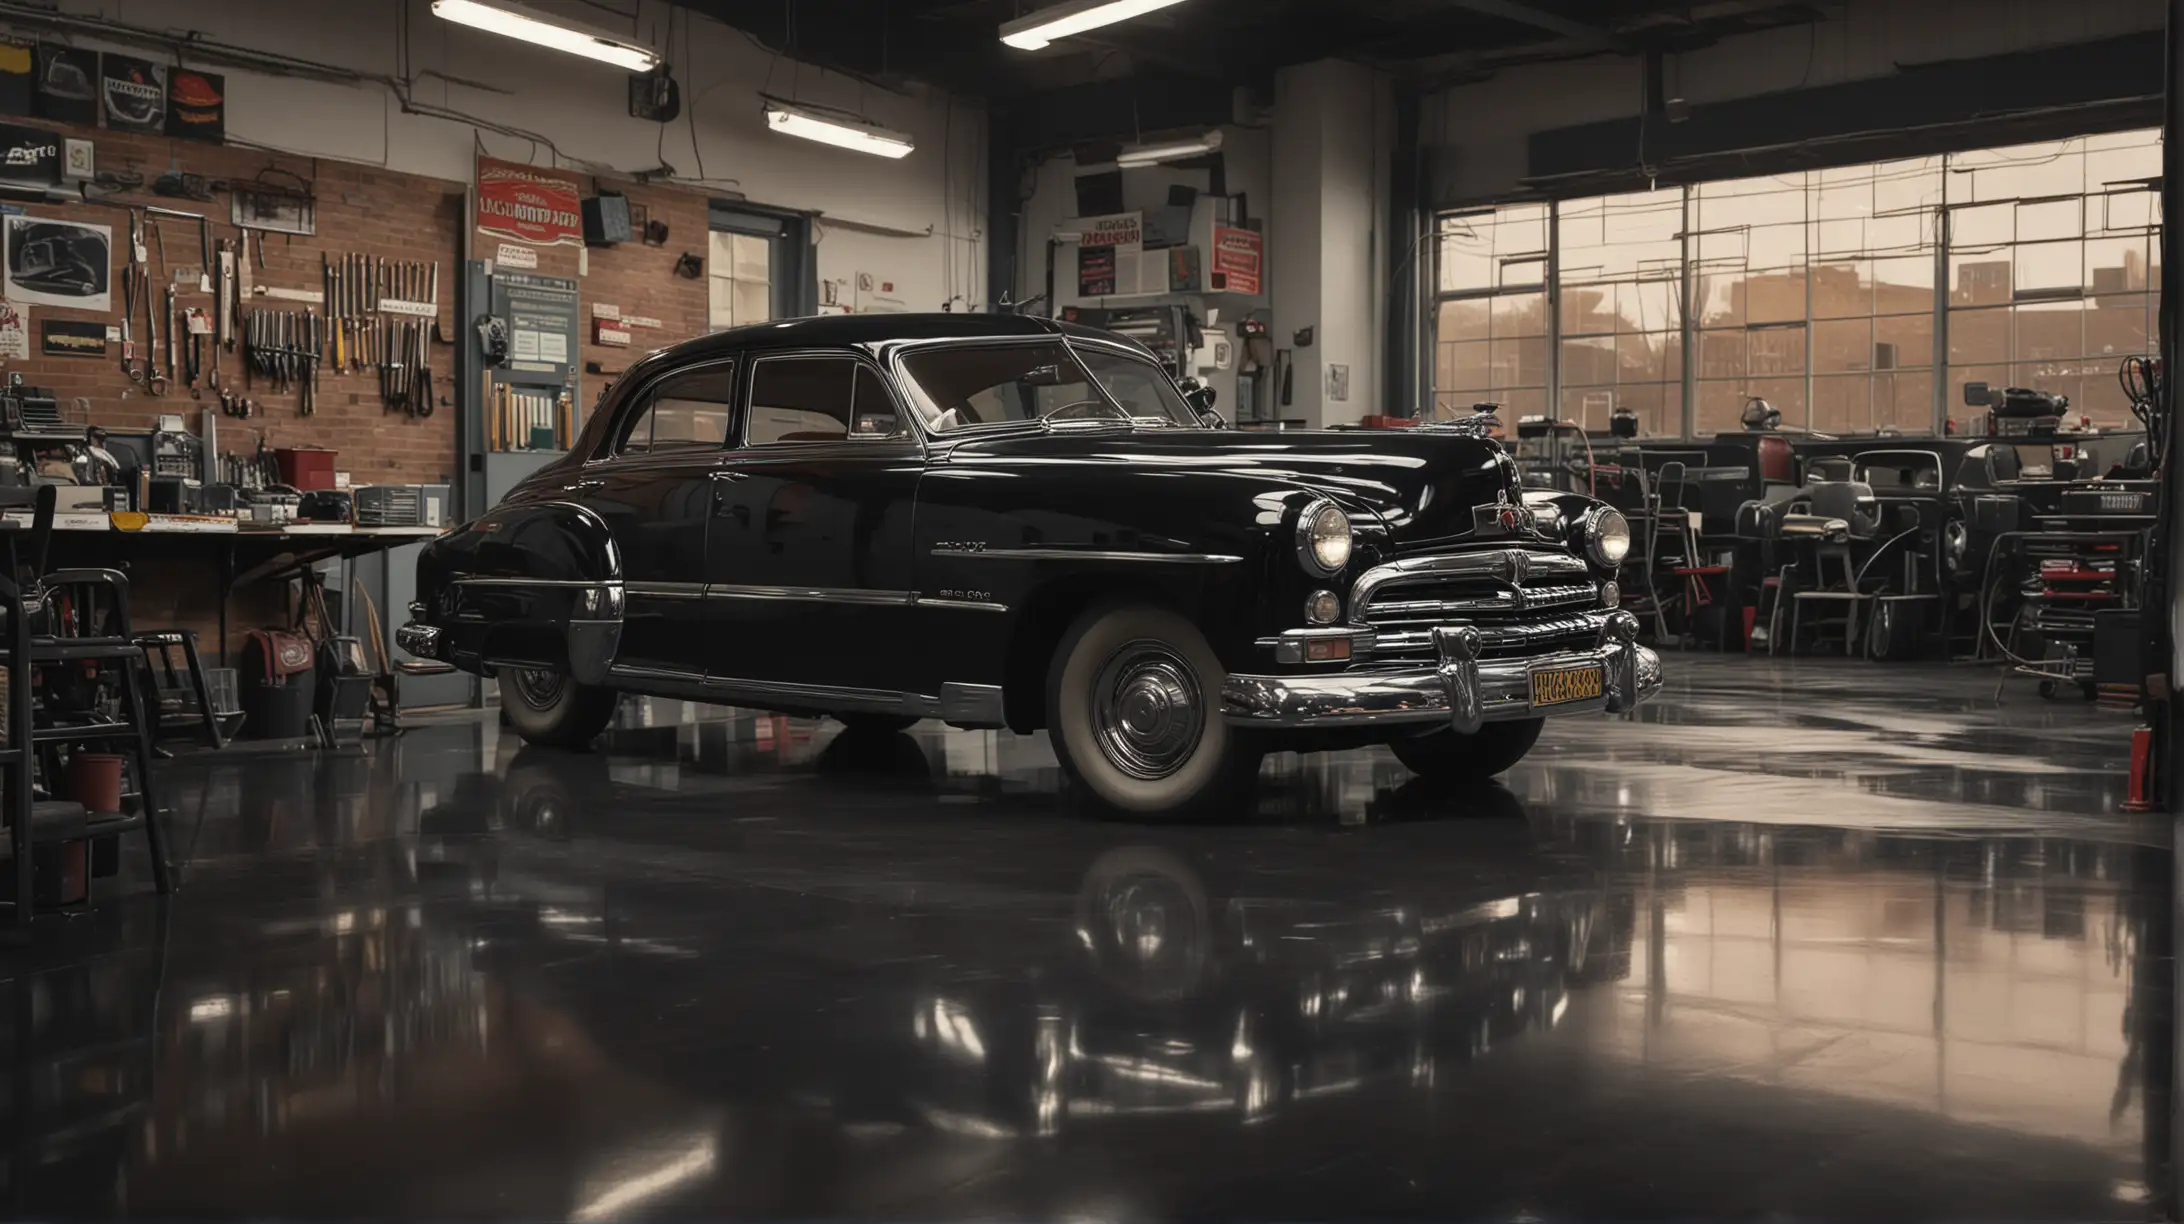 An image of the interior of a car repair shop with a chrome theme, a shiny black floor. A black vintage 1949 Hudson Commodore car is in the foreground. Cinematic lighting, photographic quality.